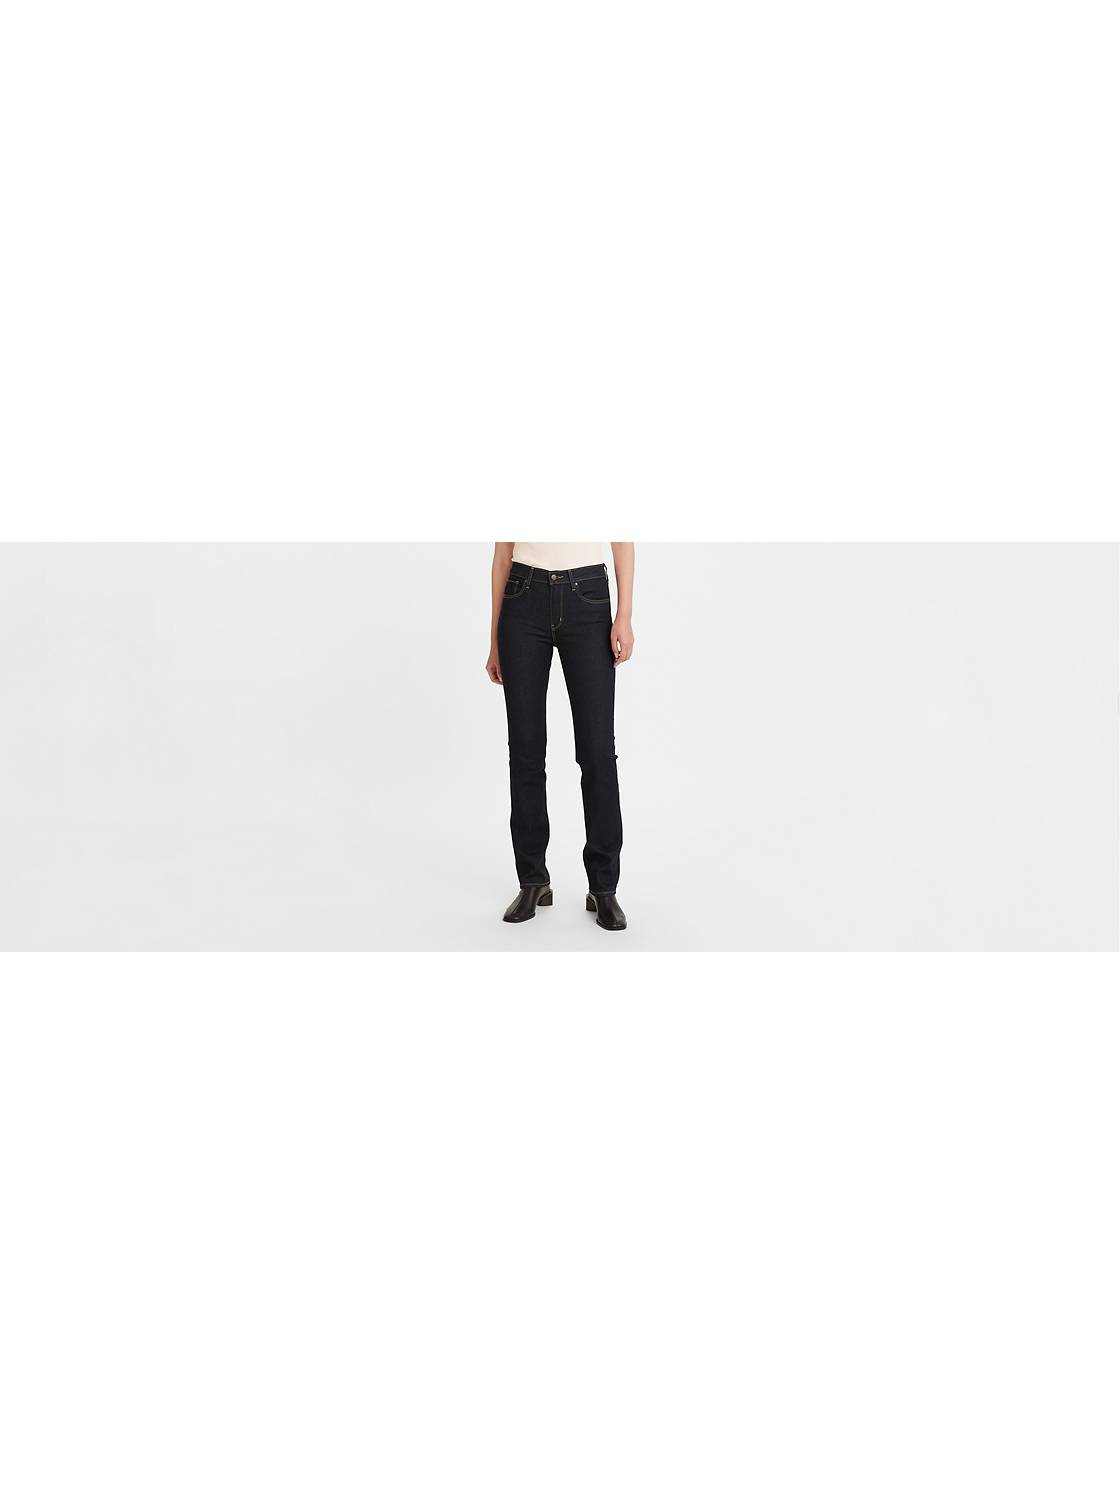 Tall Women's Jeans: Women's Tall Skinny Jeans & More